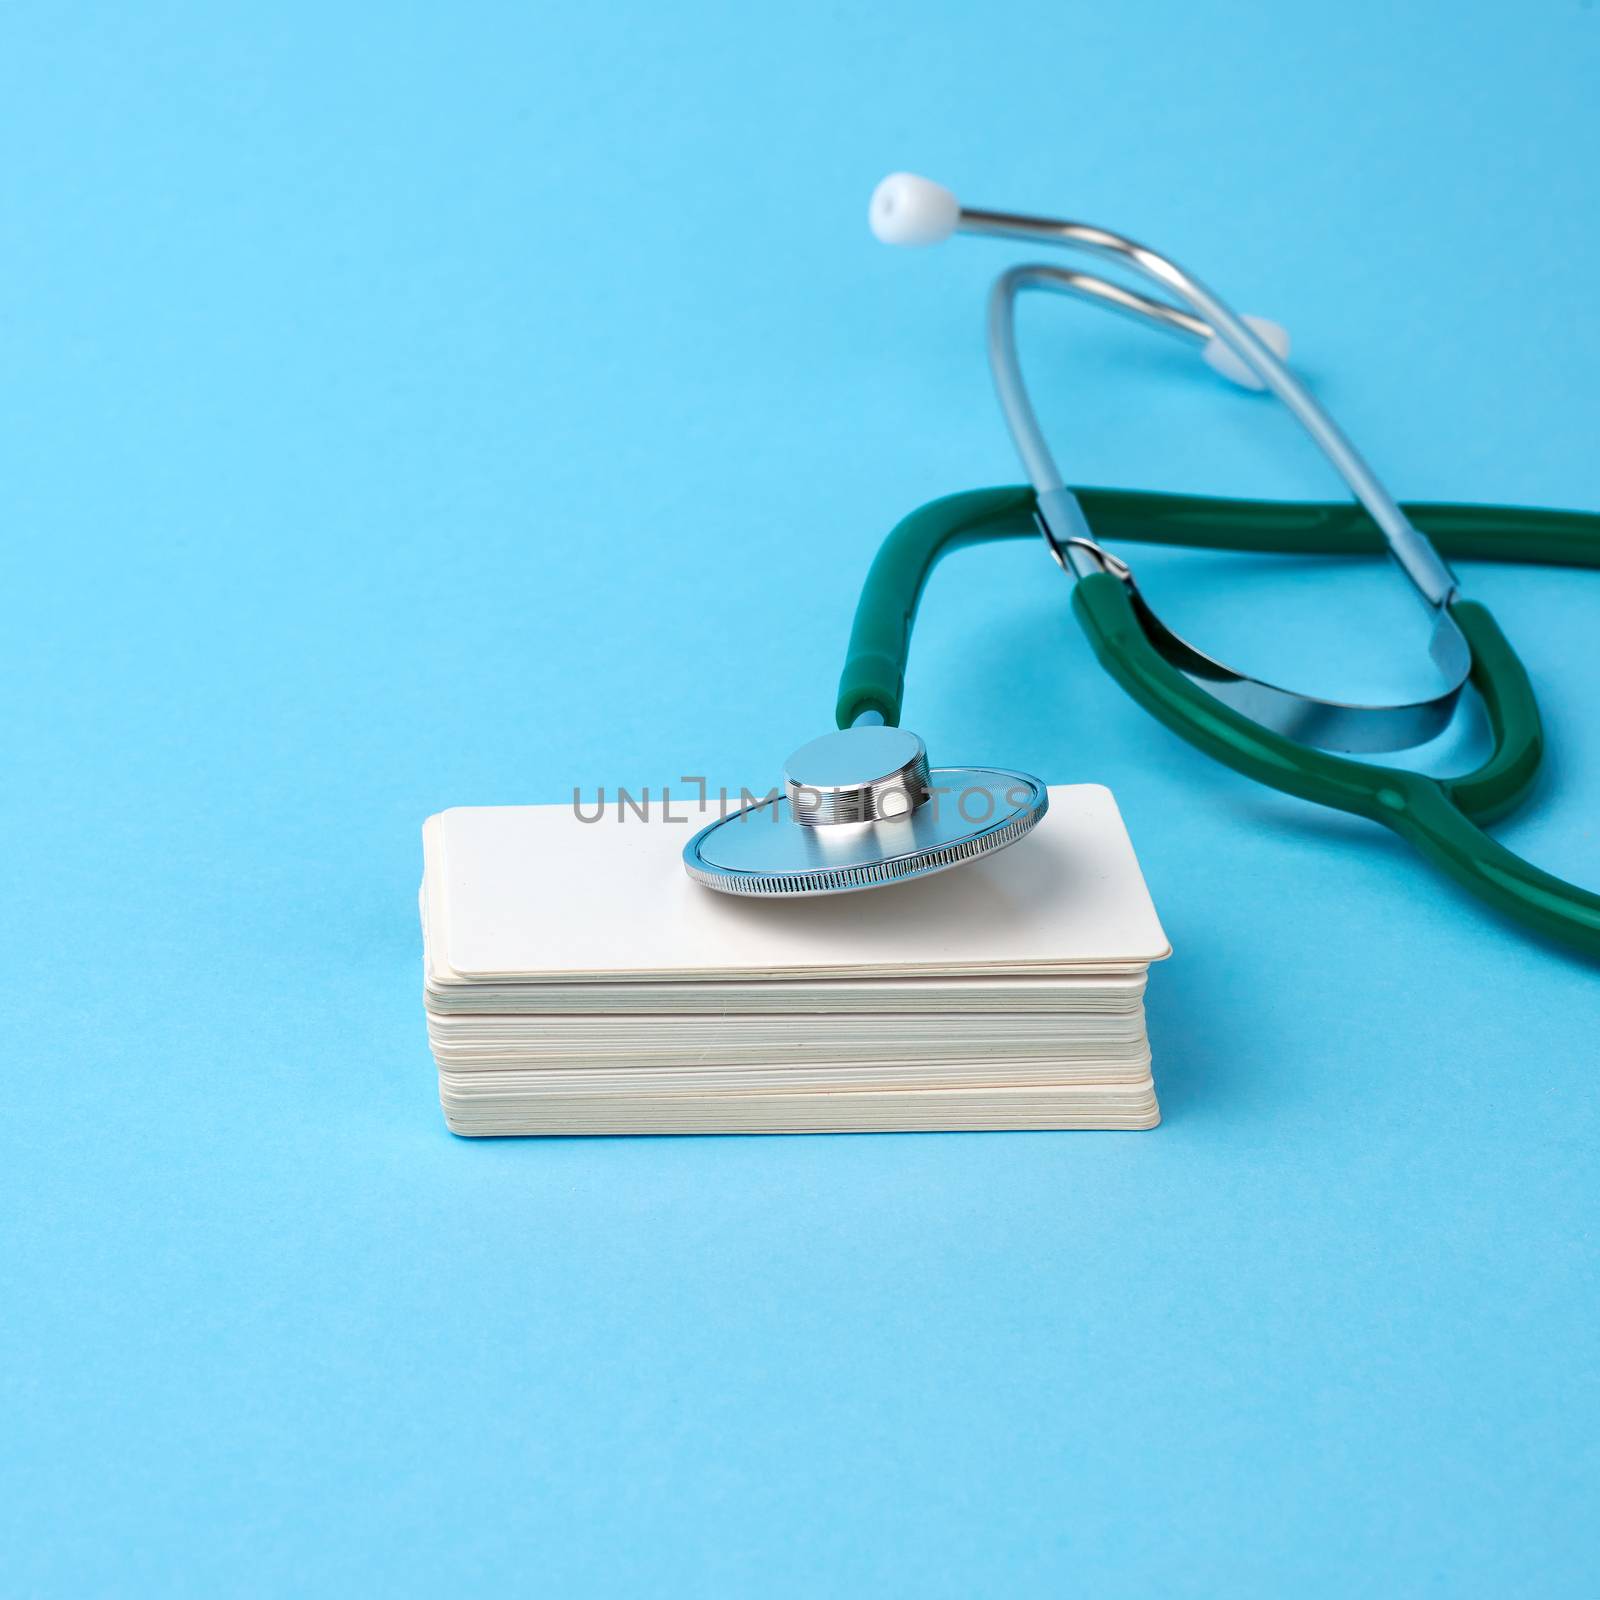 medical stethoscope and empty paper business cards on a blue background, selective focus